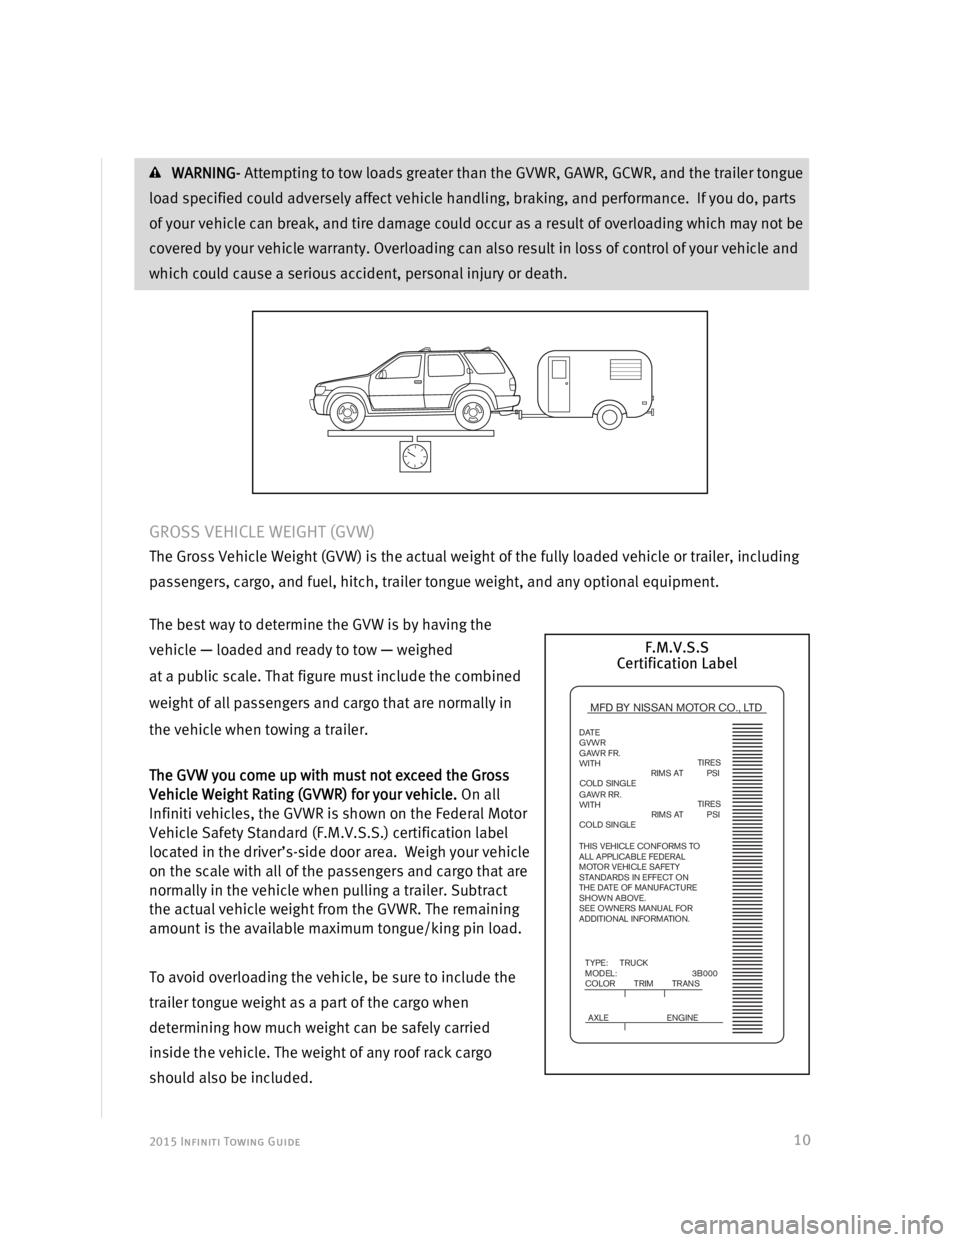 INFINITI Q50 2015  Towing Guide  2015 Infiniti Towing Guide  
 
 
10
 WARNING- Attempting to tow loads greater than the GVWR, GAWR, GCWR, and the trailer tongue 
load specified could adversely affect vehicle handling, braking, and p